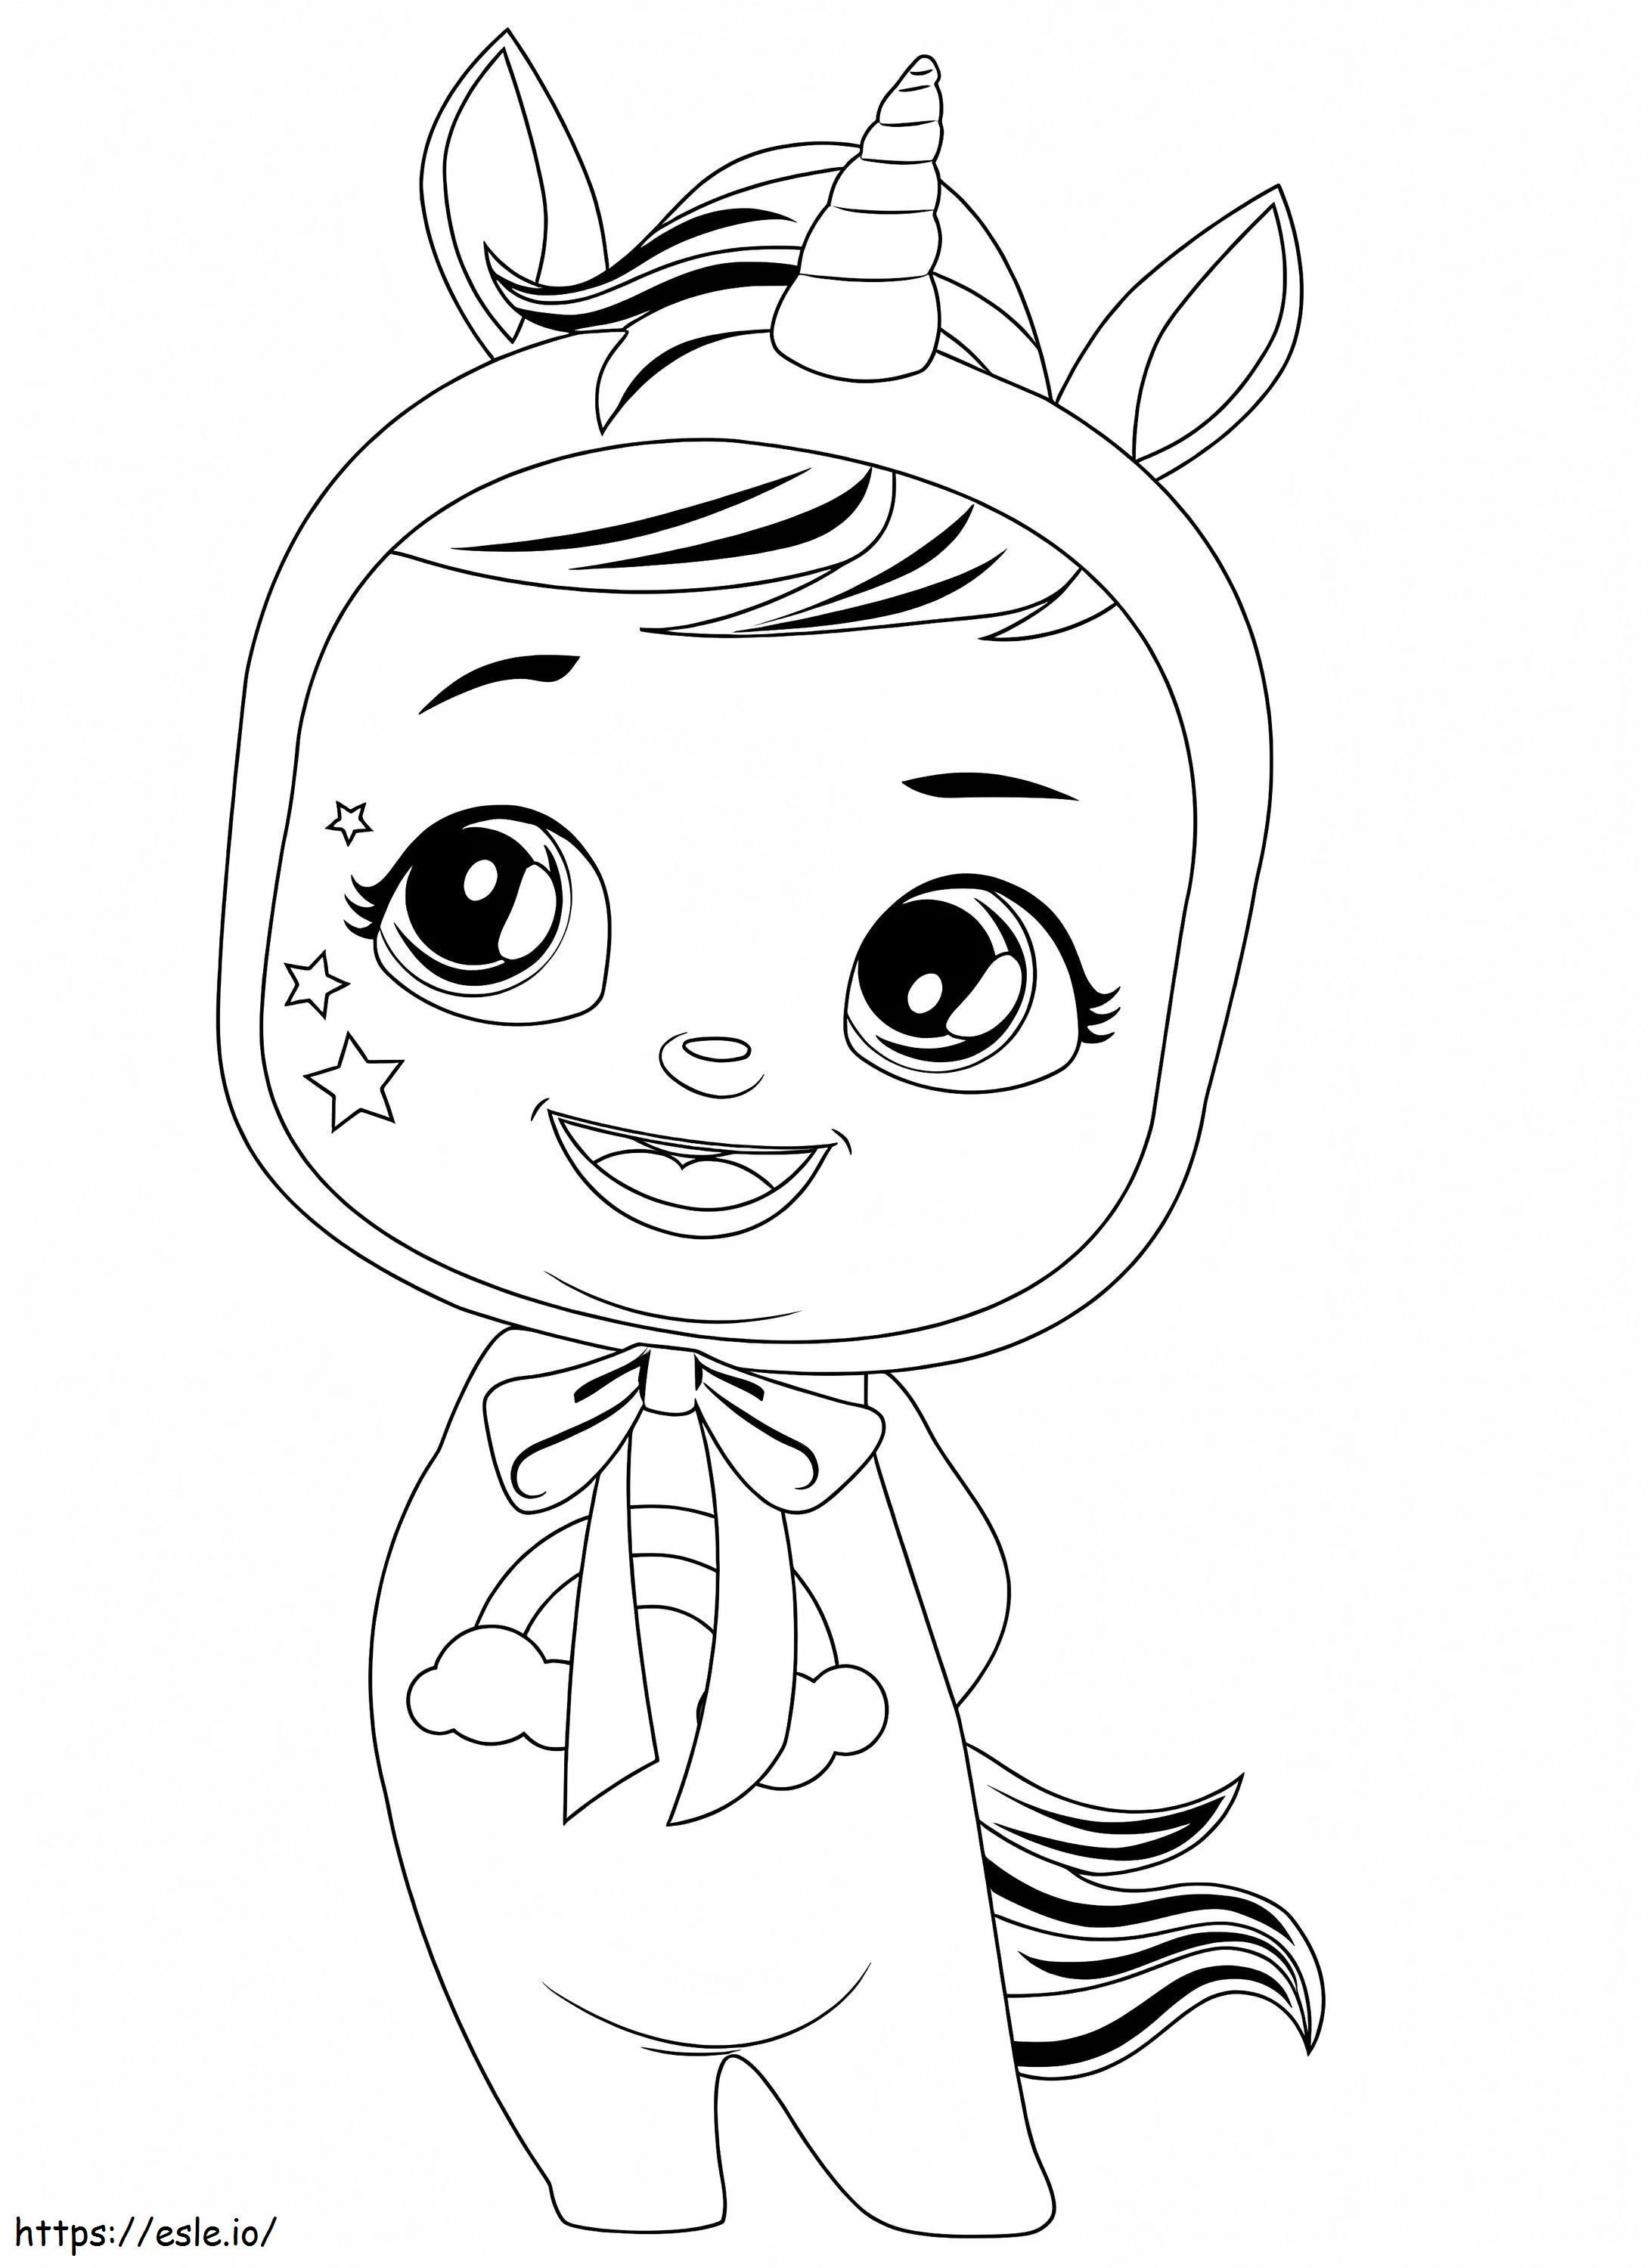 Dreamy Cry Babies coloring page